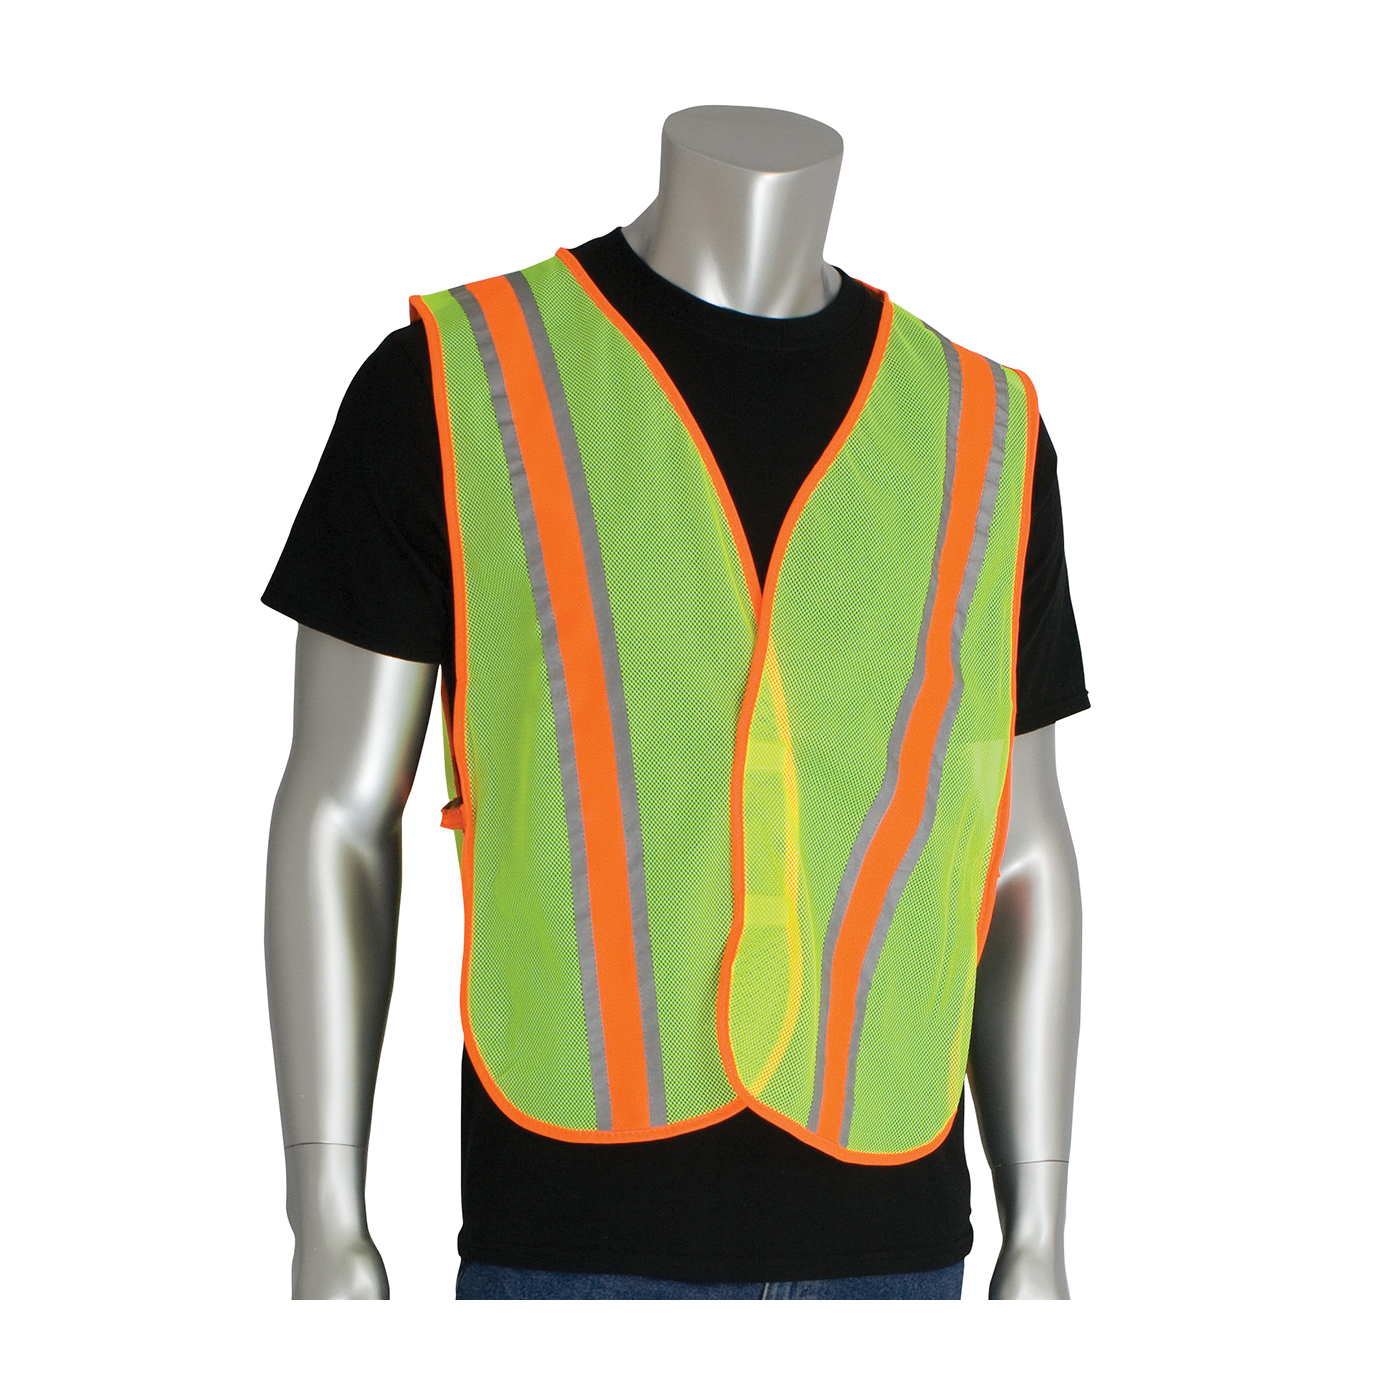 PIP® 300-0900LY 2-Tone Non-ANSI Safety Vest, Universal, Hi-Viz Lime Yellow, Polyester Mesh, Hook and Loop Closure